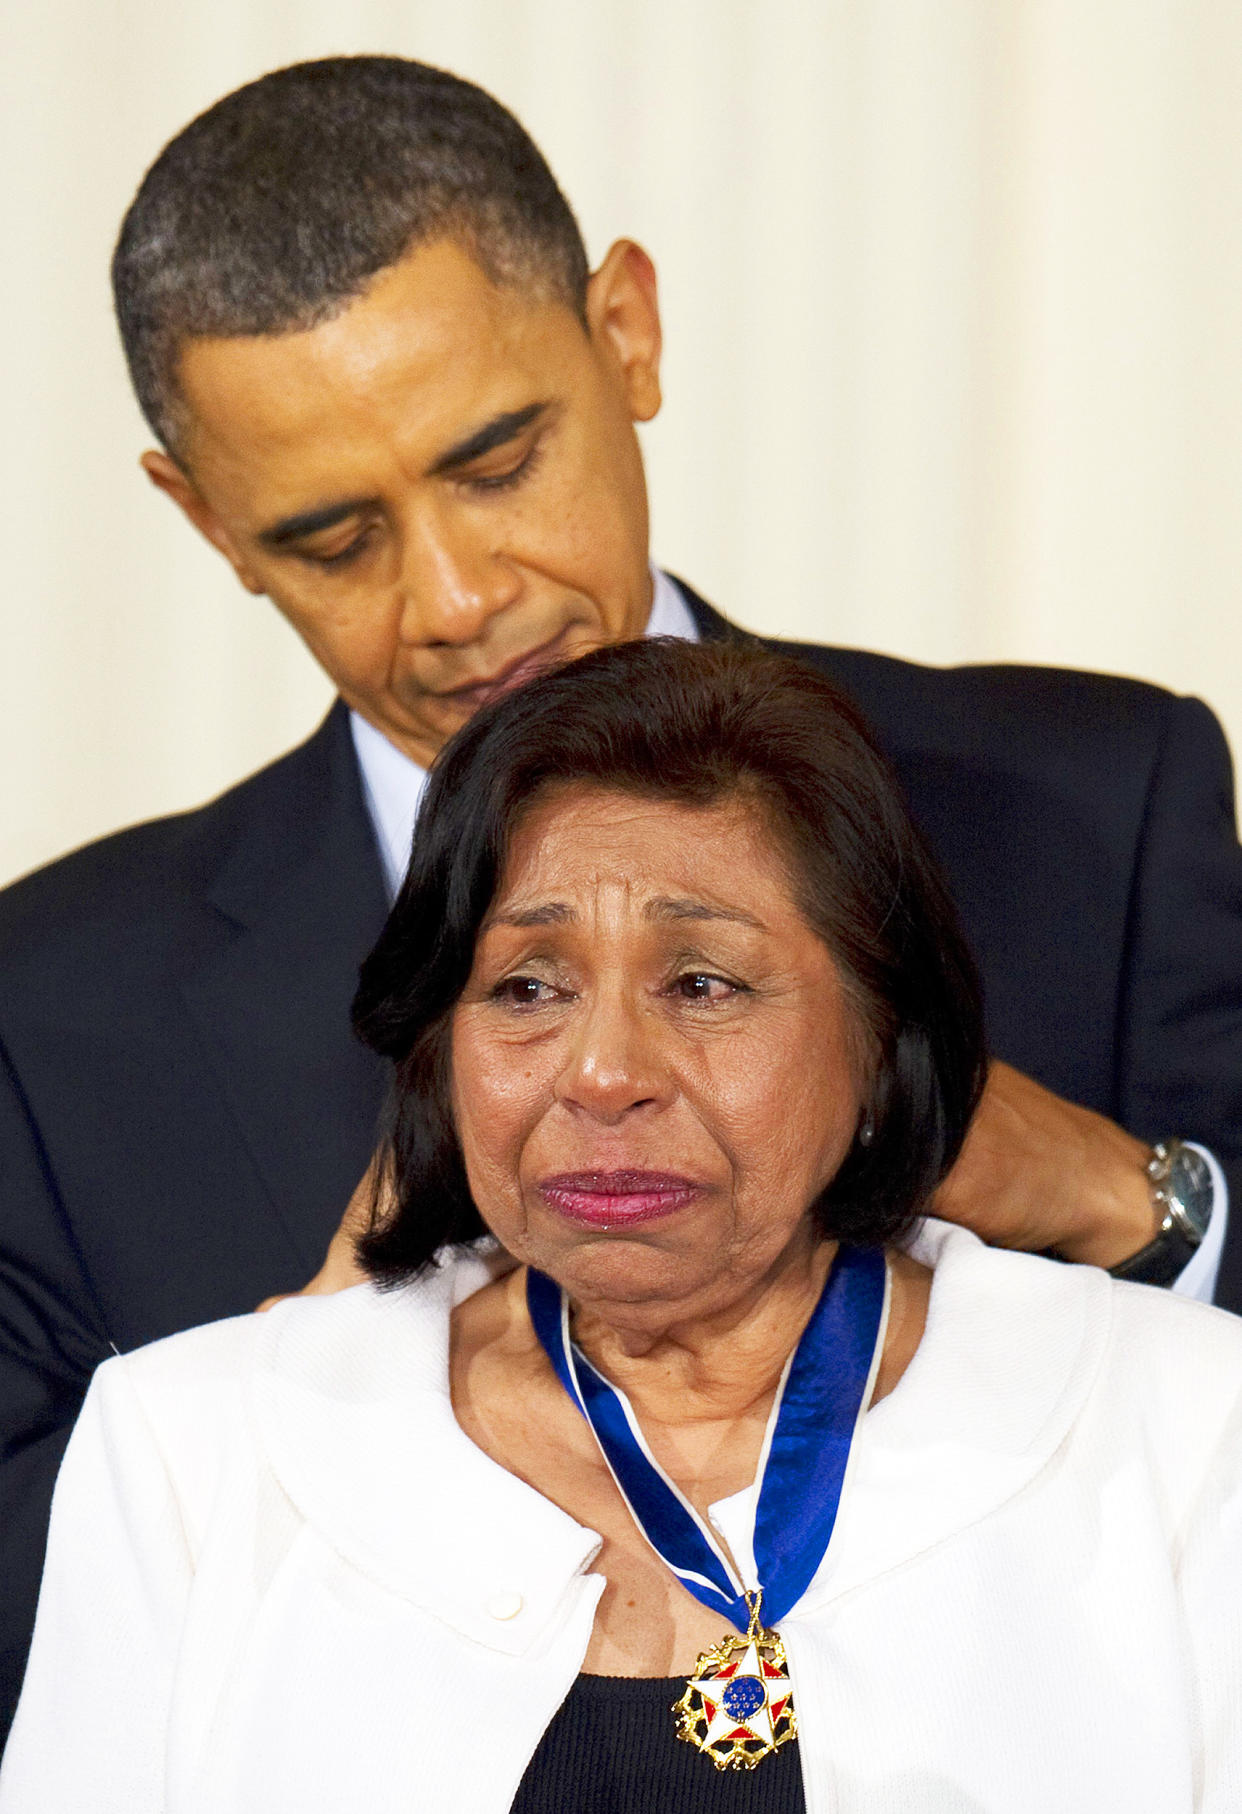 Image: President Barack Obama awards the 2010 Medal of Freedom to civil rights activist Sylvia Mendez at the White House on Feb. 15, 2011. (Jim Watson / AFP via Getty Images file)